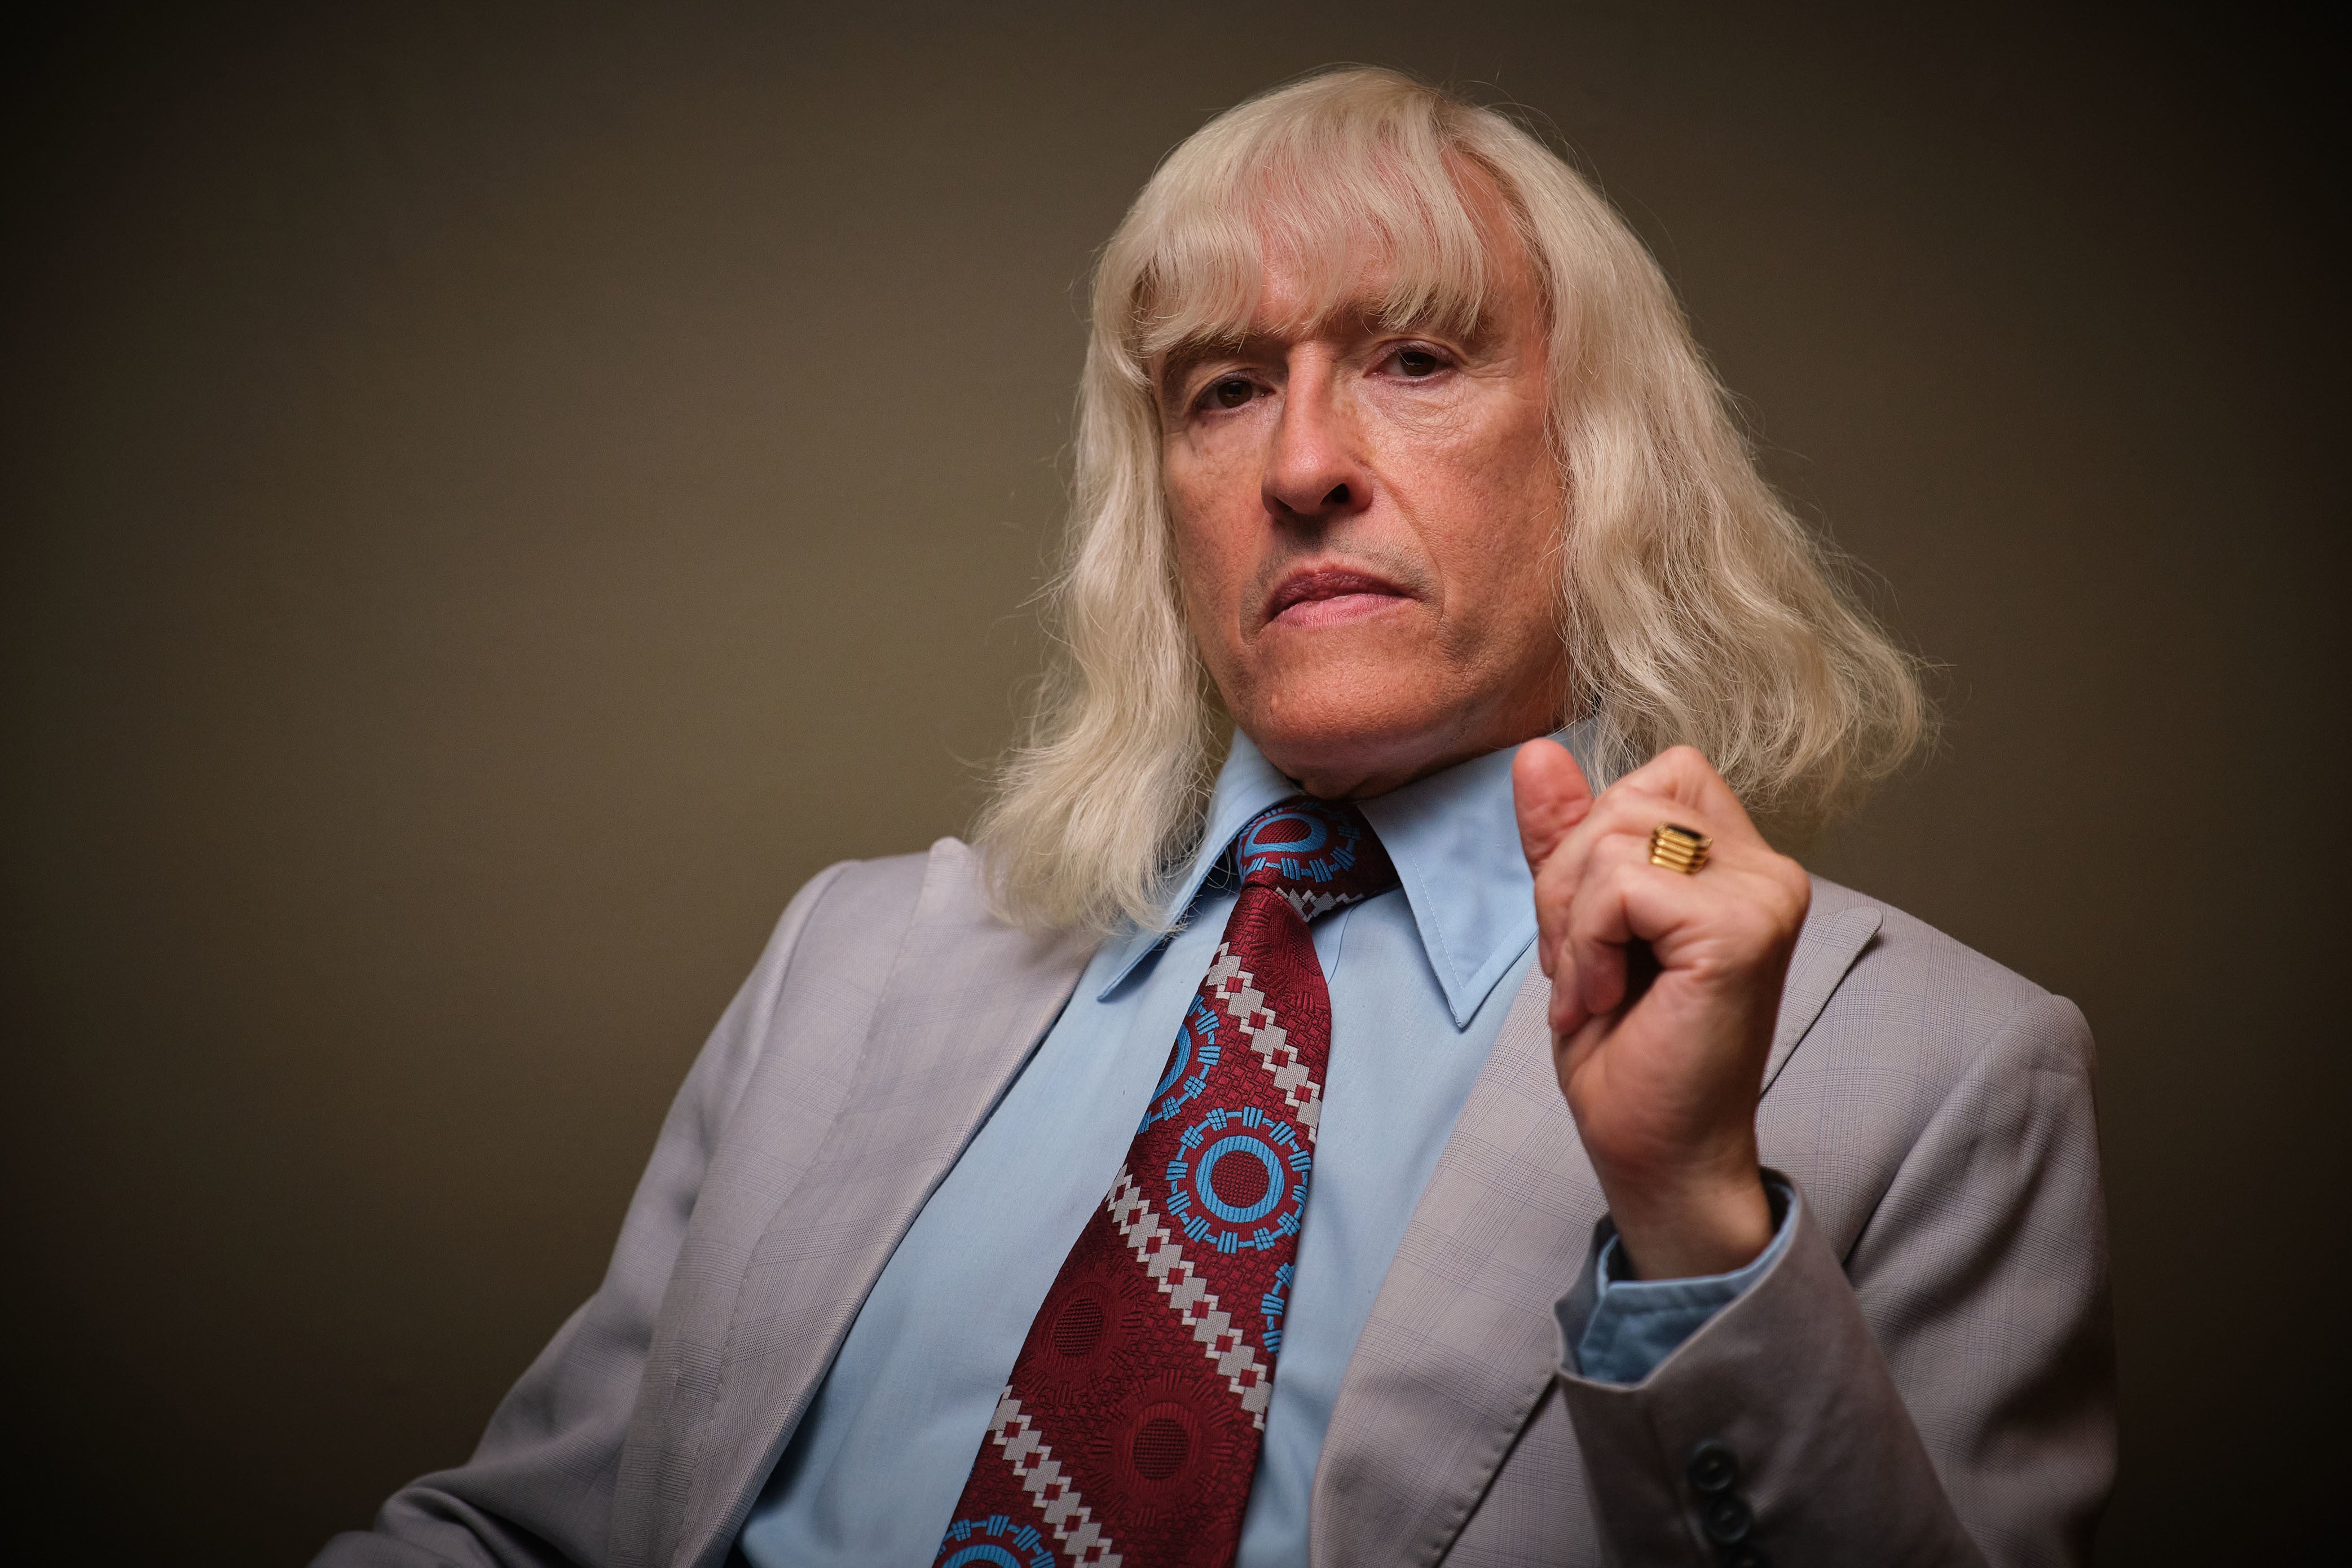 Steve Coogan portrays Jimmy Savile in ‘The Reckoning’